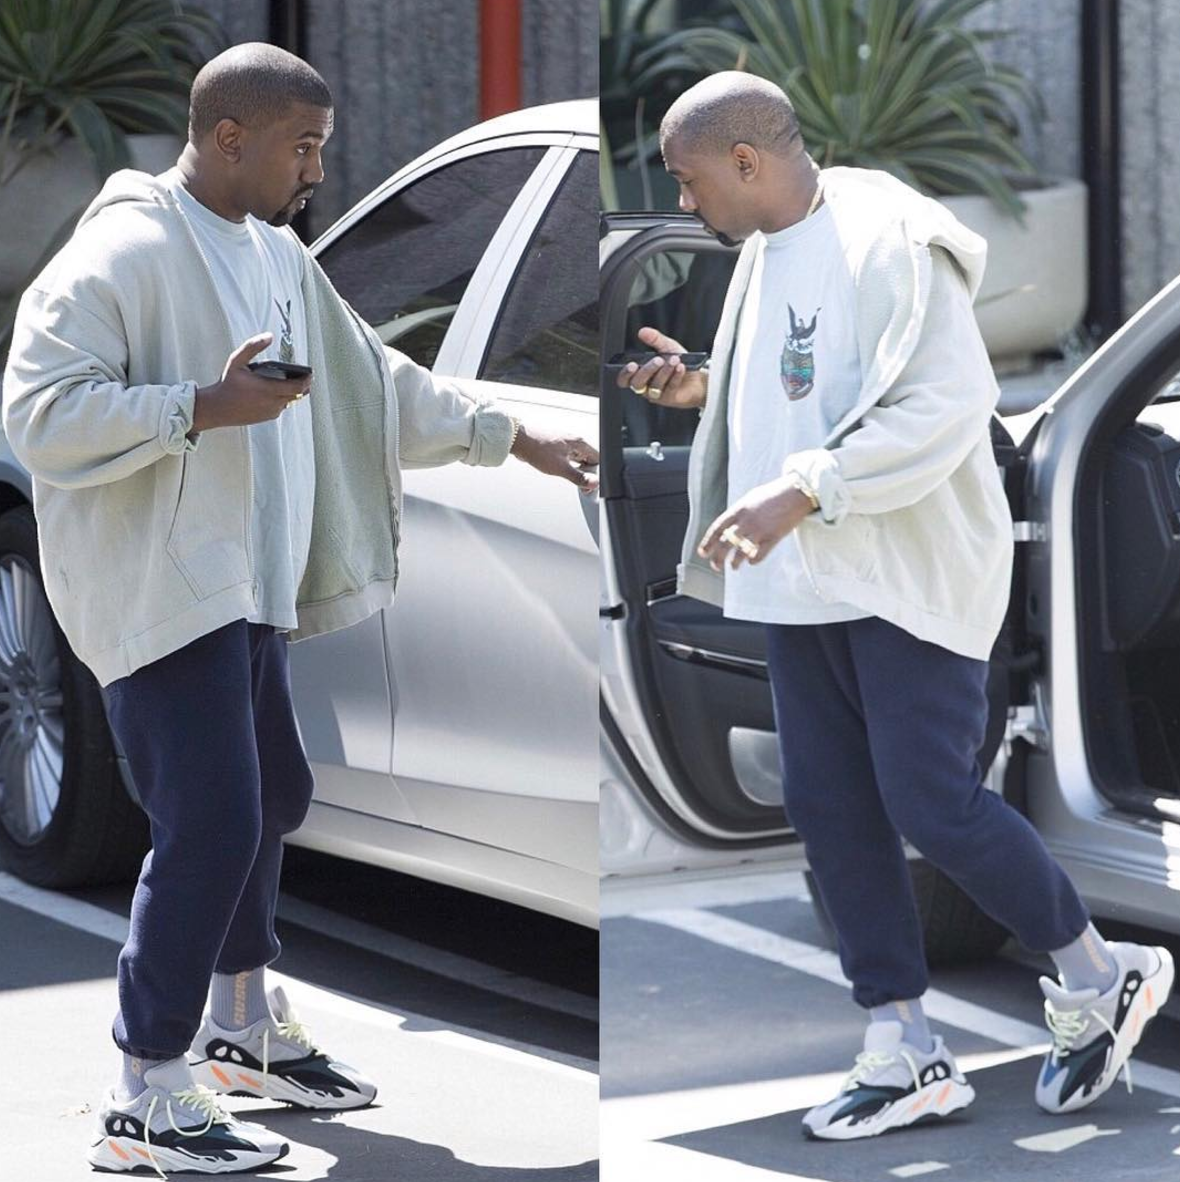 SPOTTED: Kanye West in adidas YEEZY Calabasas T-Shirt, Socks And Wave Runner 700 Sneakers